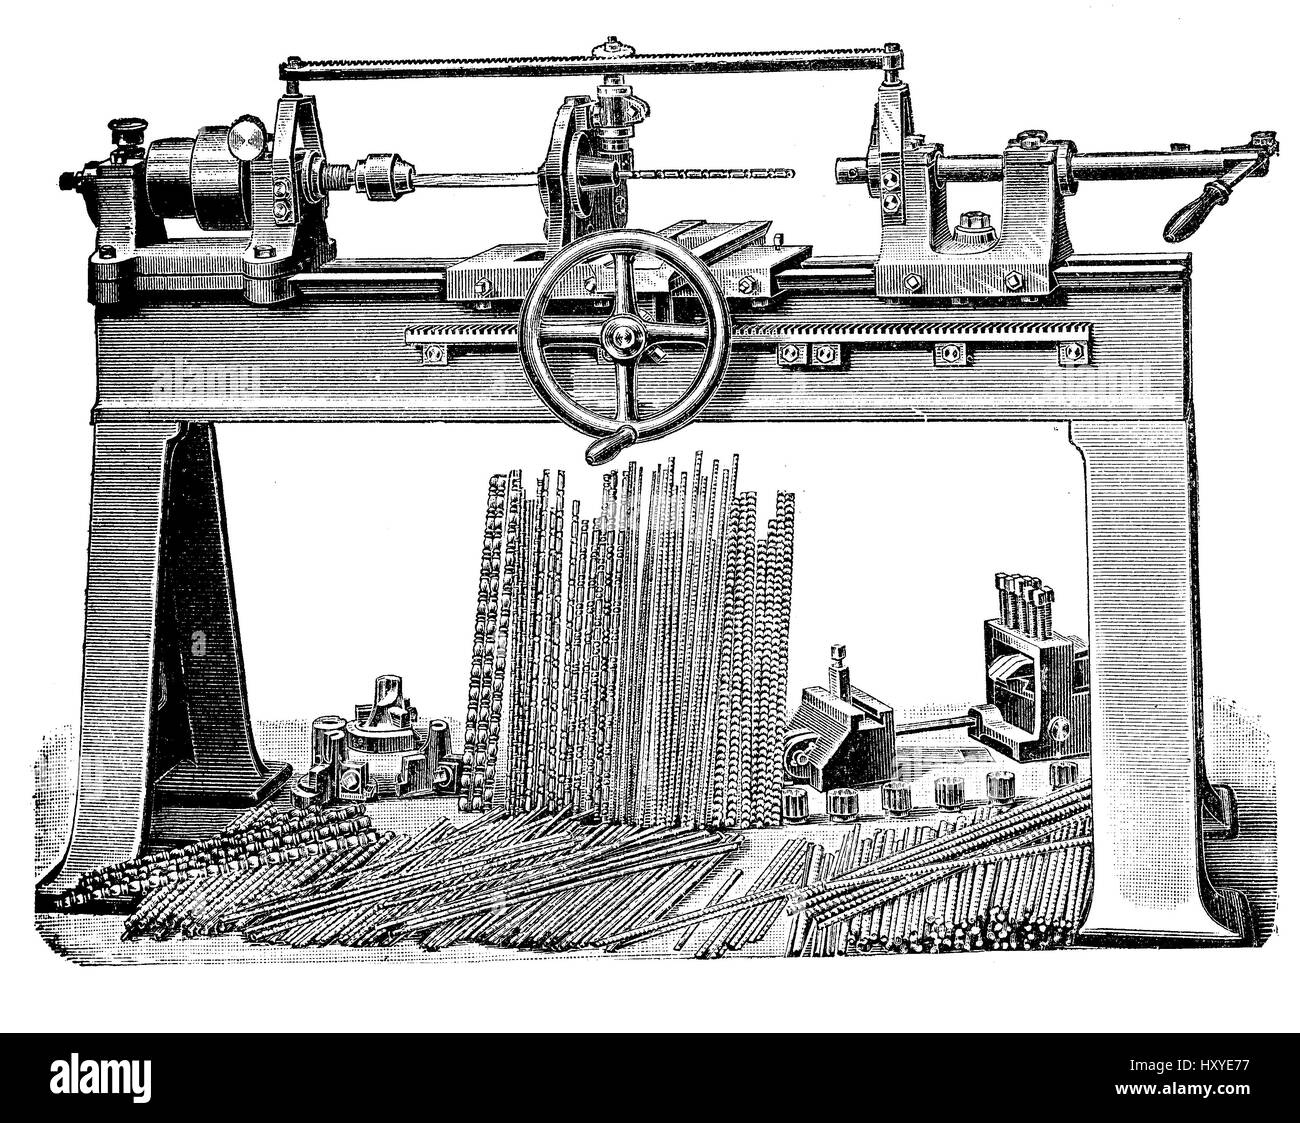 Metalworking, turning bench lathe in production with accessories, vintage engraving Stock Photo